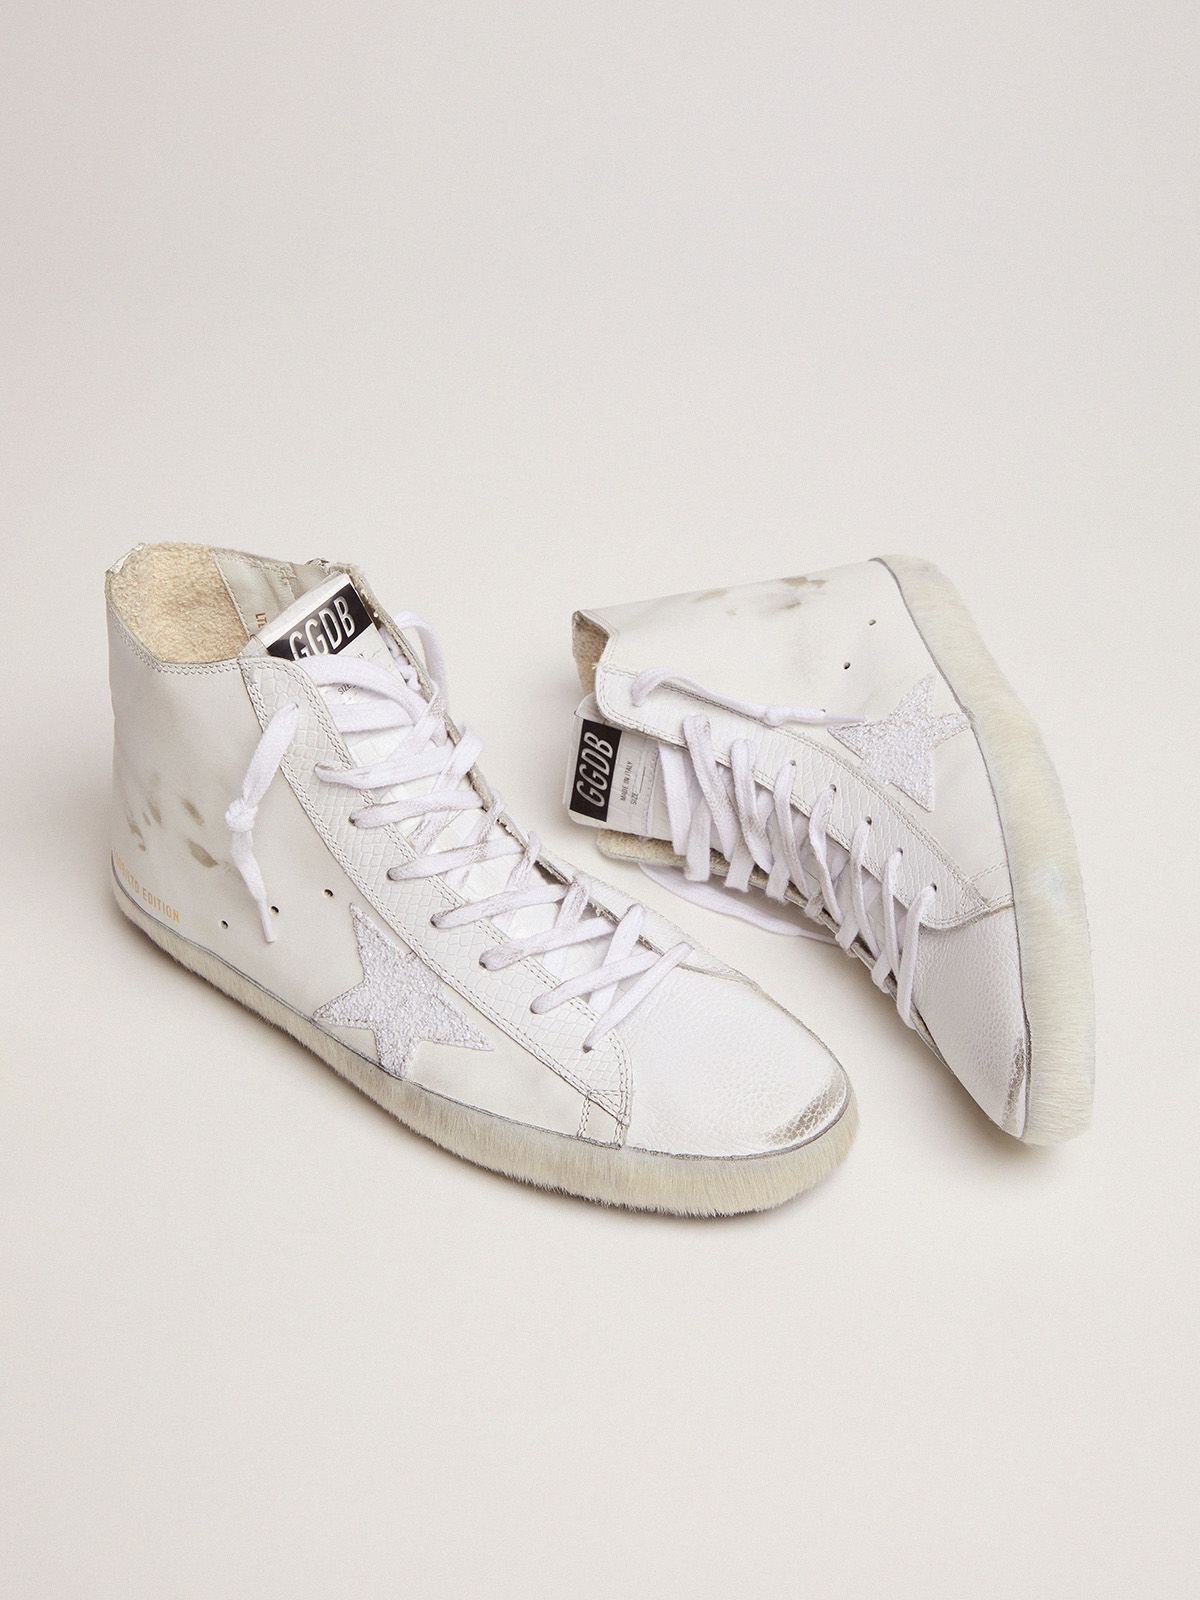 Men’s LAB Limited Edition white and glitter Francy sneakers